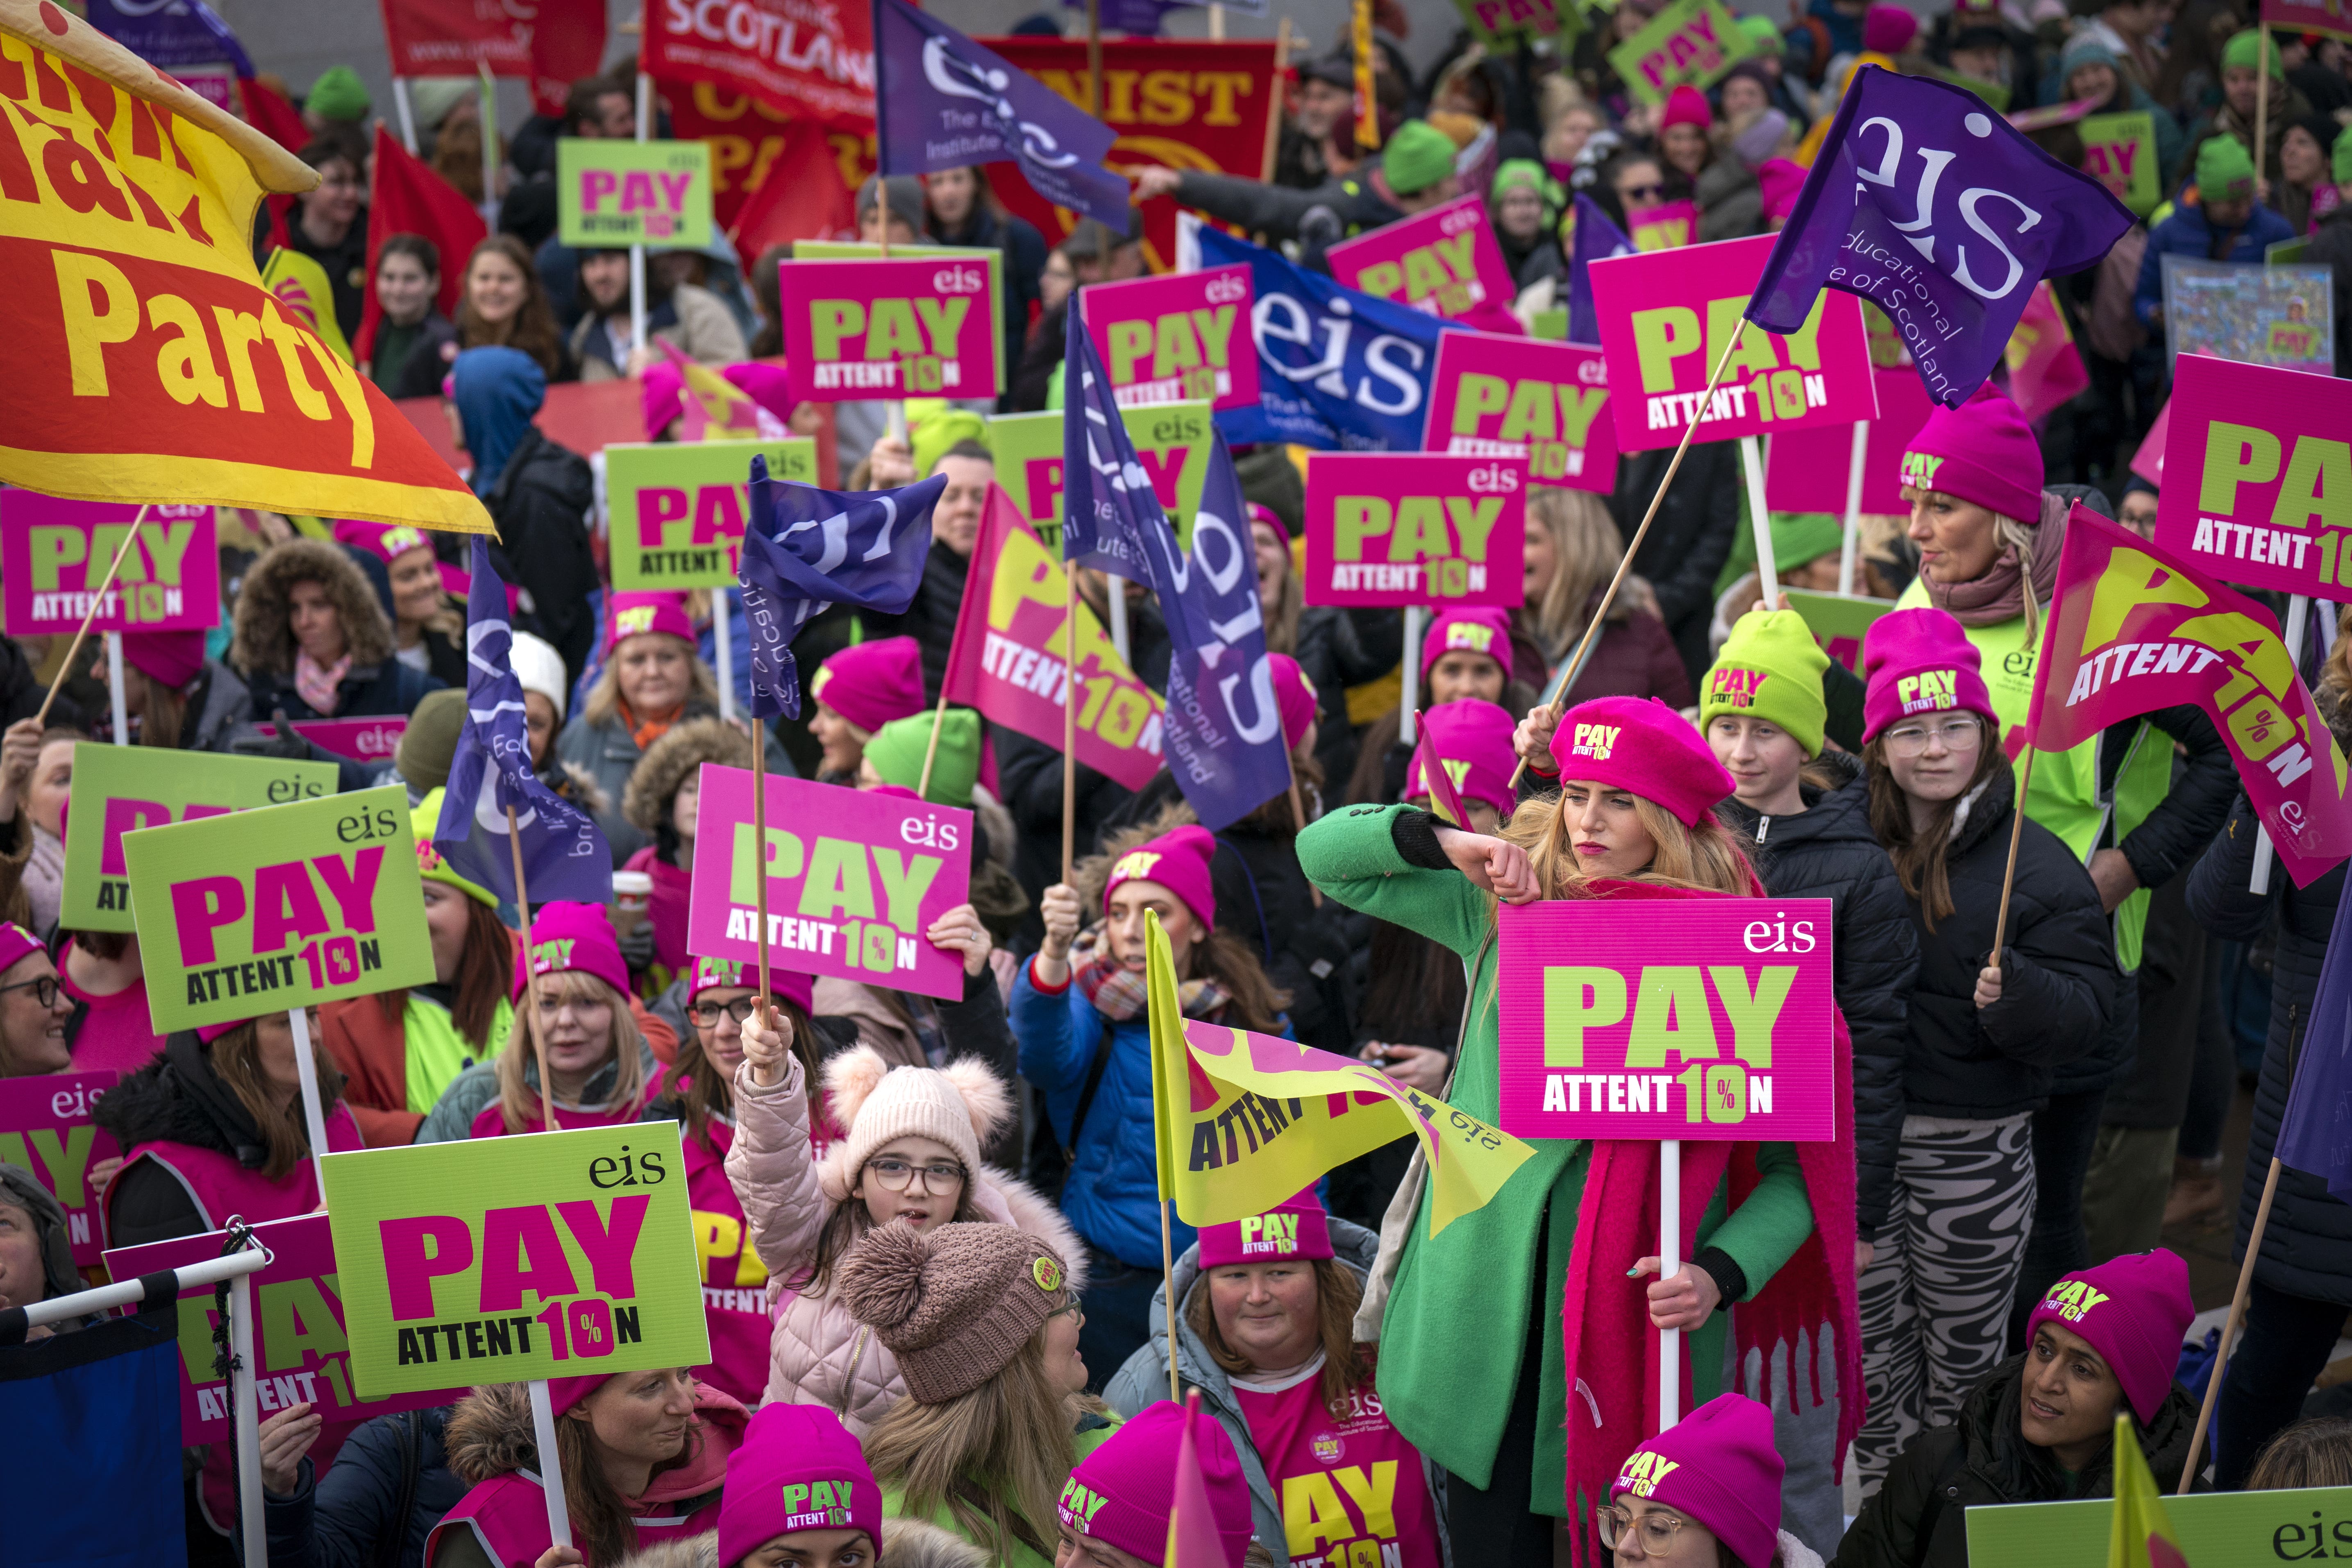 Teachers in Scotland have already walked out over pay